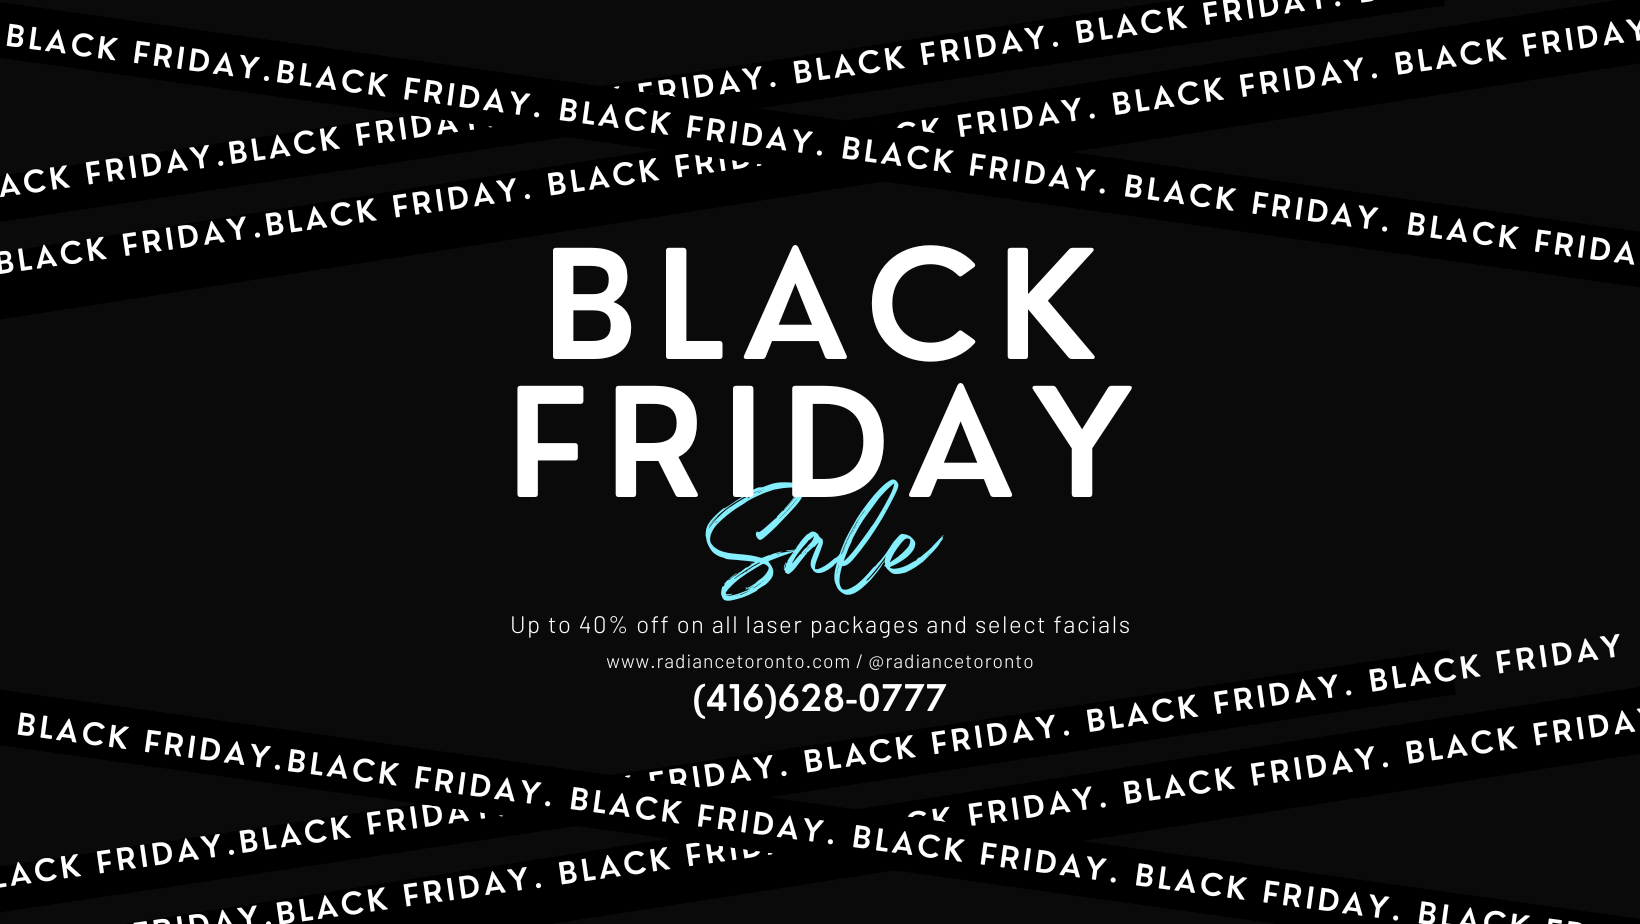 Black Friday Poster (Facebook Cover)